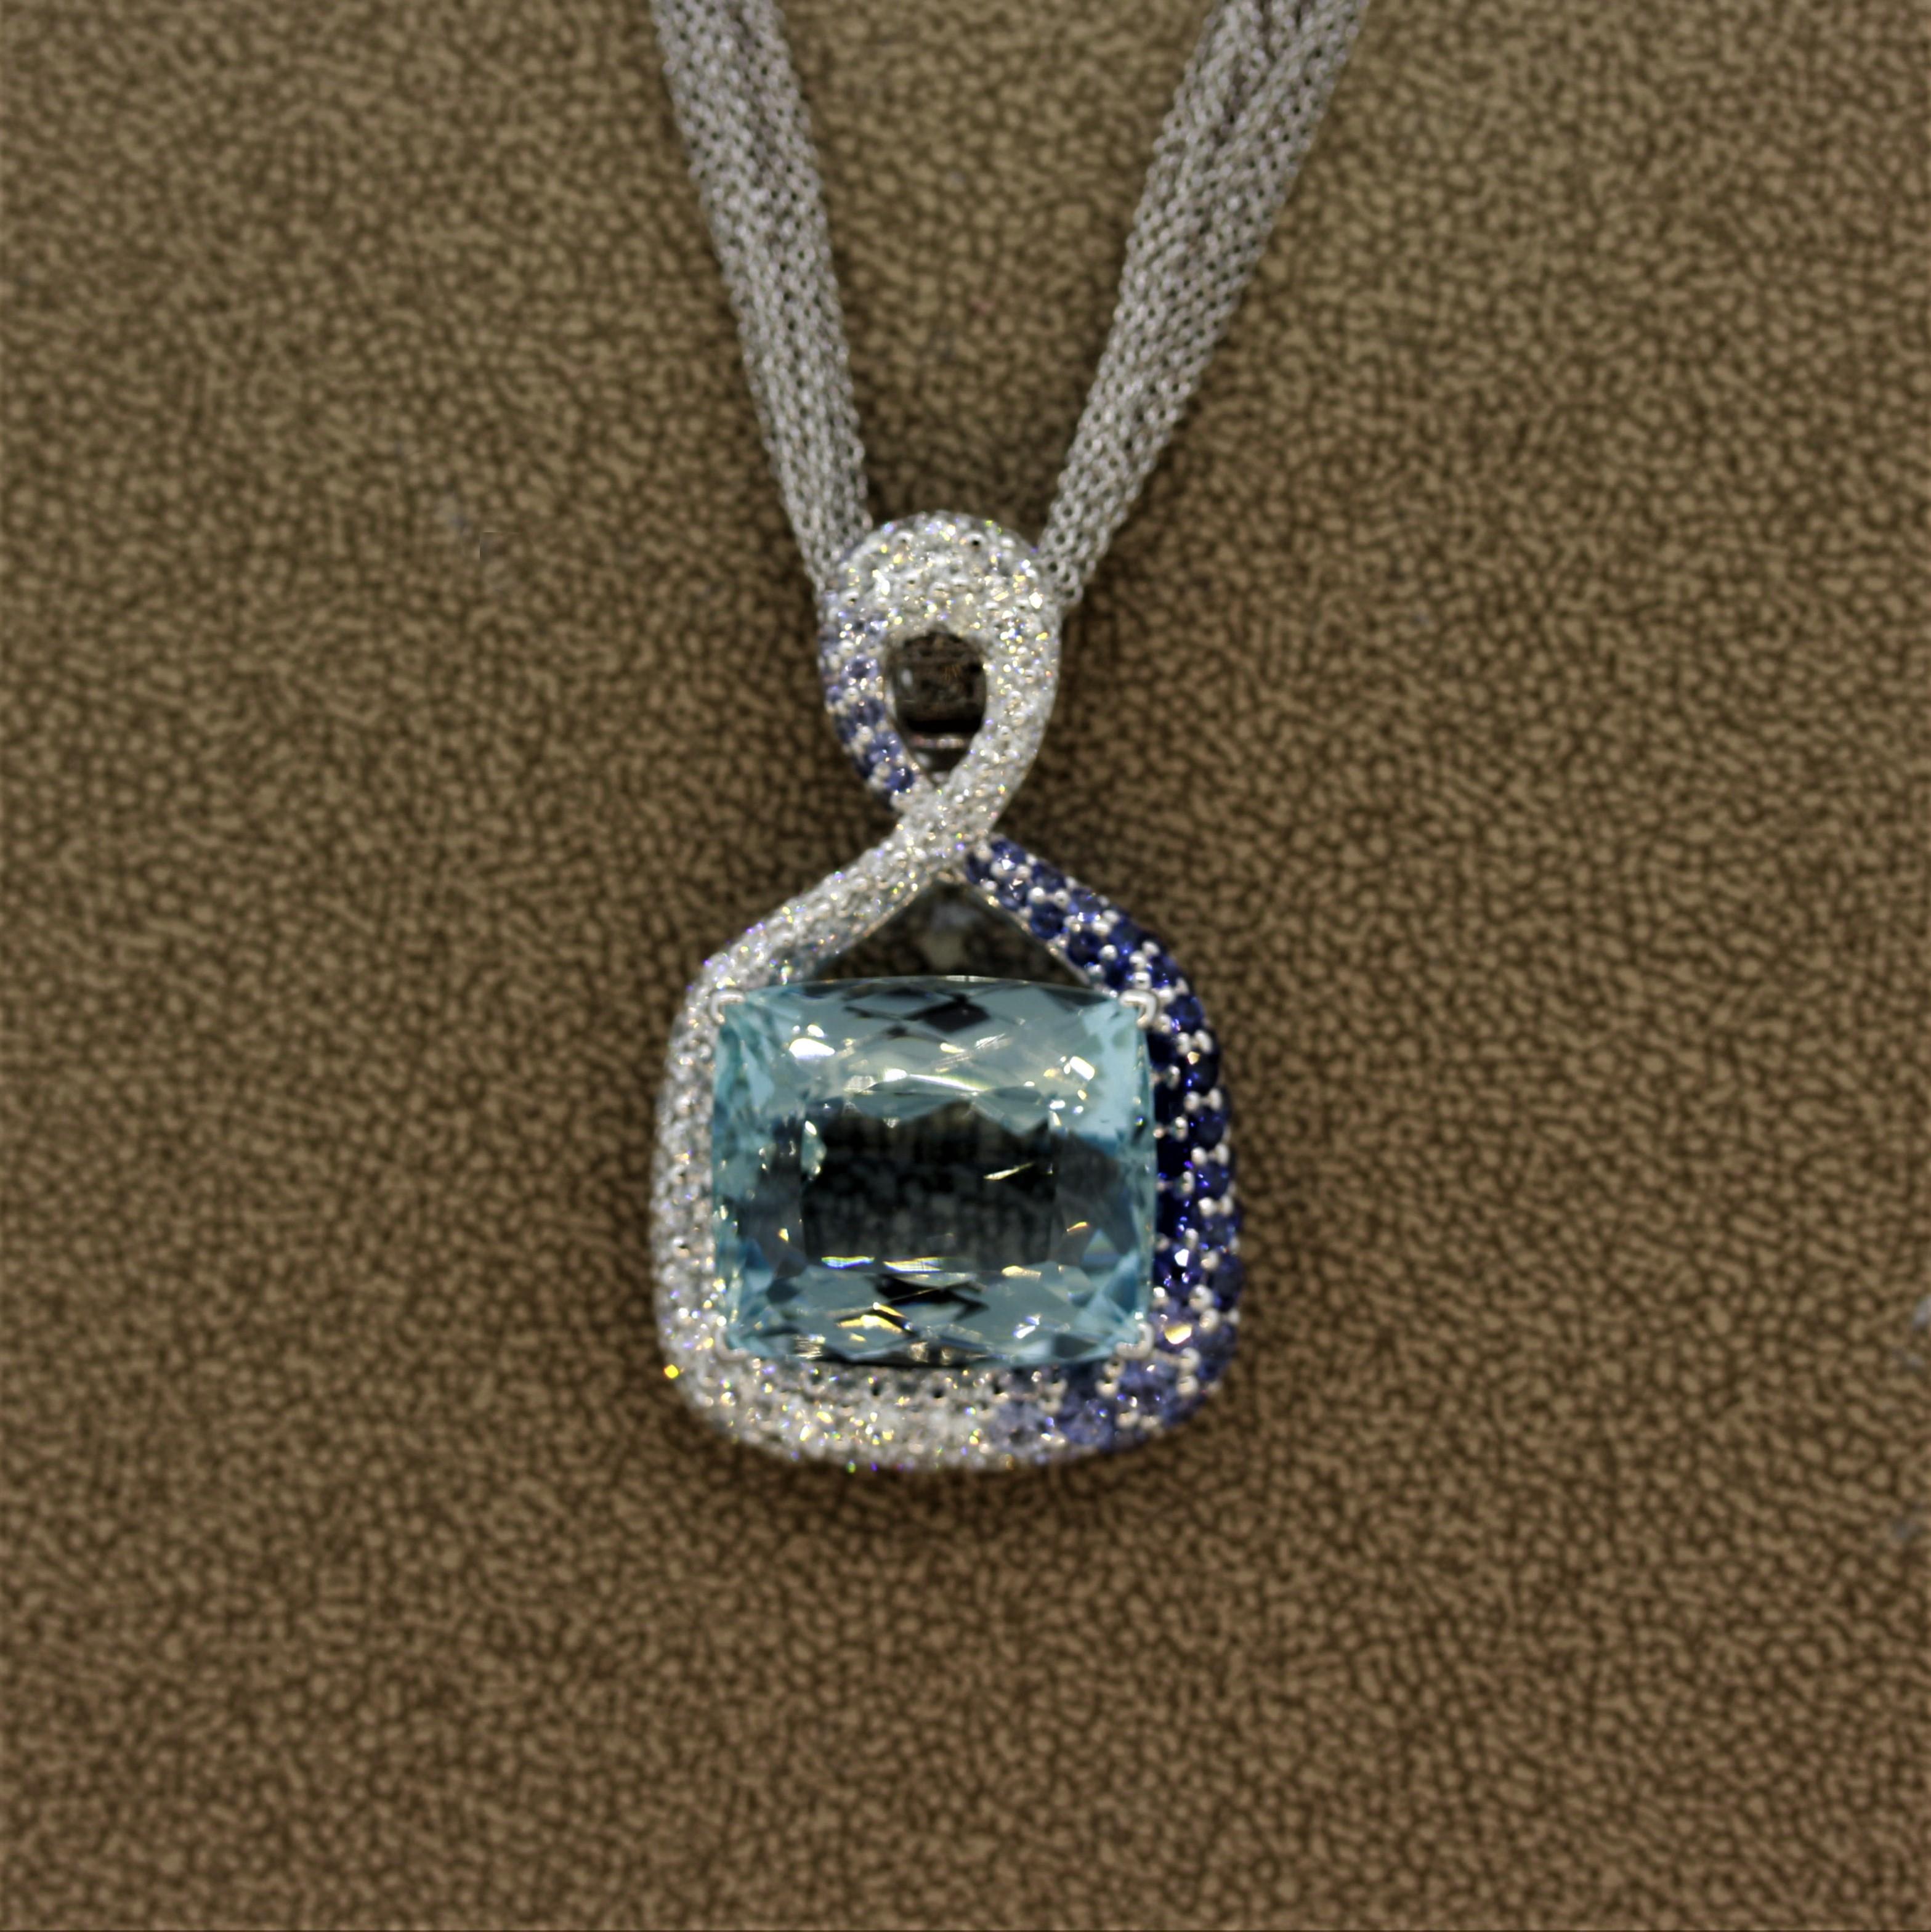 One of our favorite pieces in our collection! This one of a kind pendant features a superb gem quality aquamarine weighing 30.04 carats. It is framed in 18k white gold with diamonds and blue sapphires set around it. There are 2.00 carats of blue